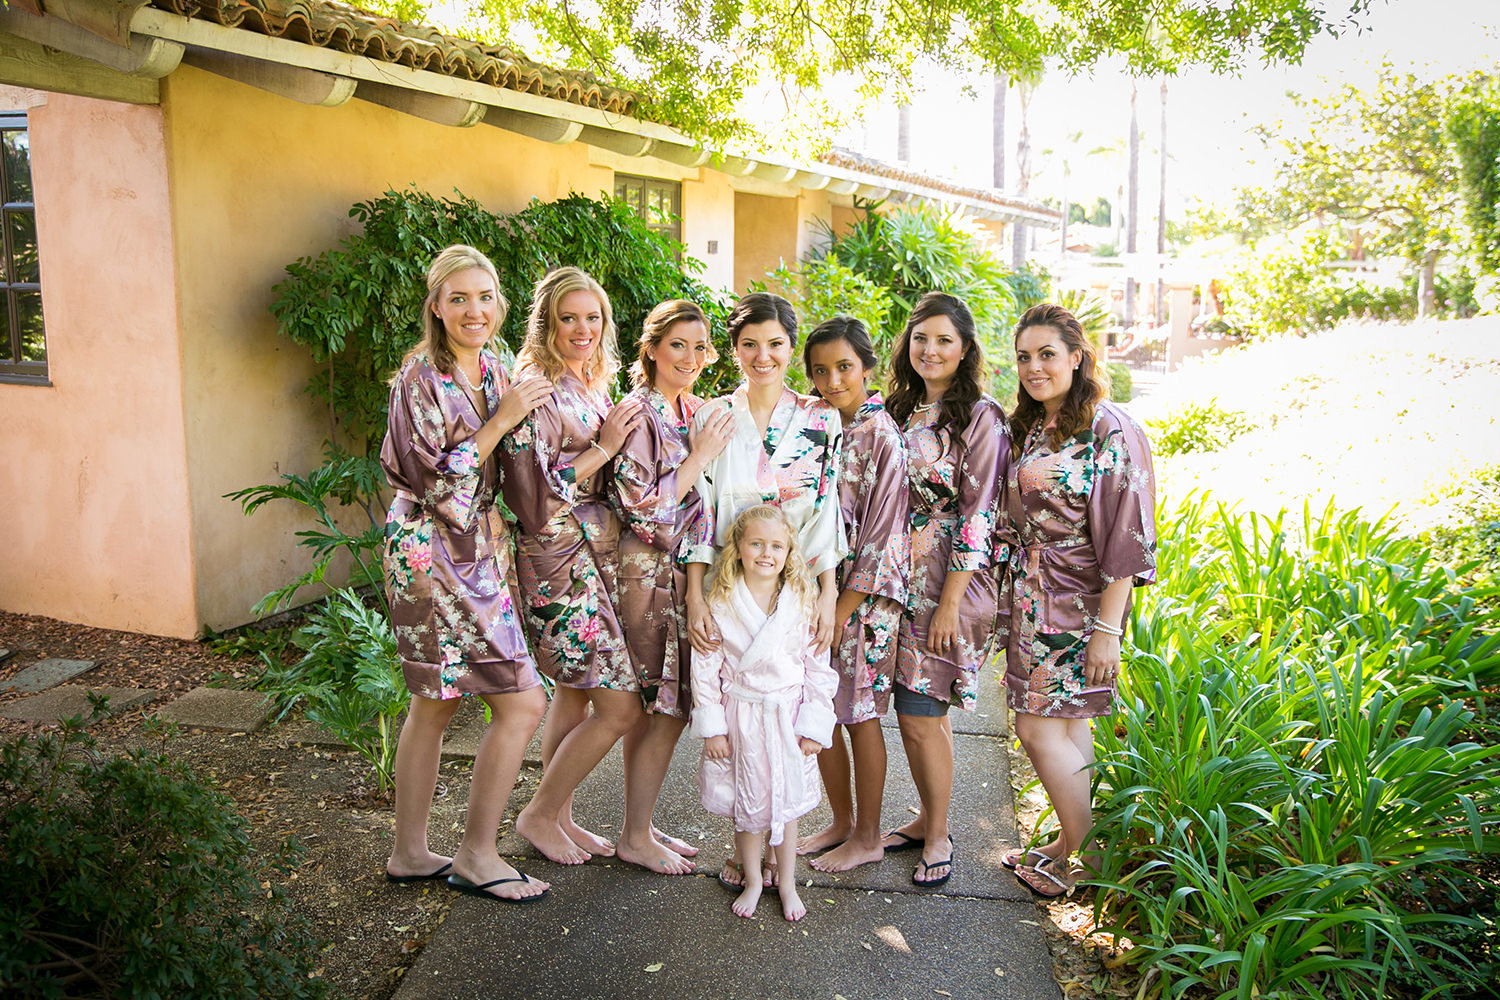 Bridesmaids in matching gift robes